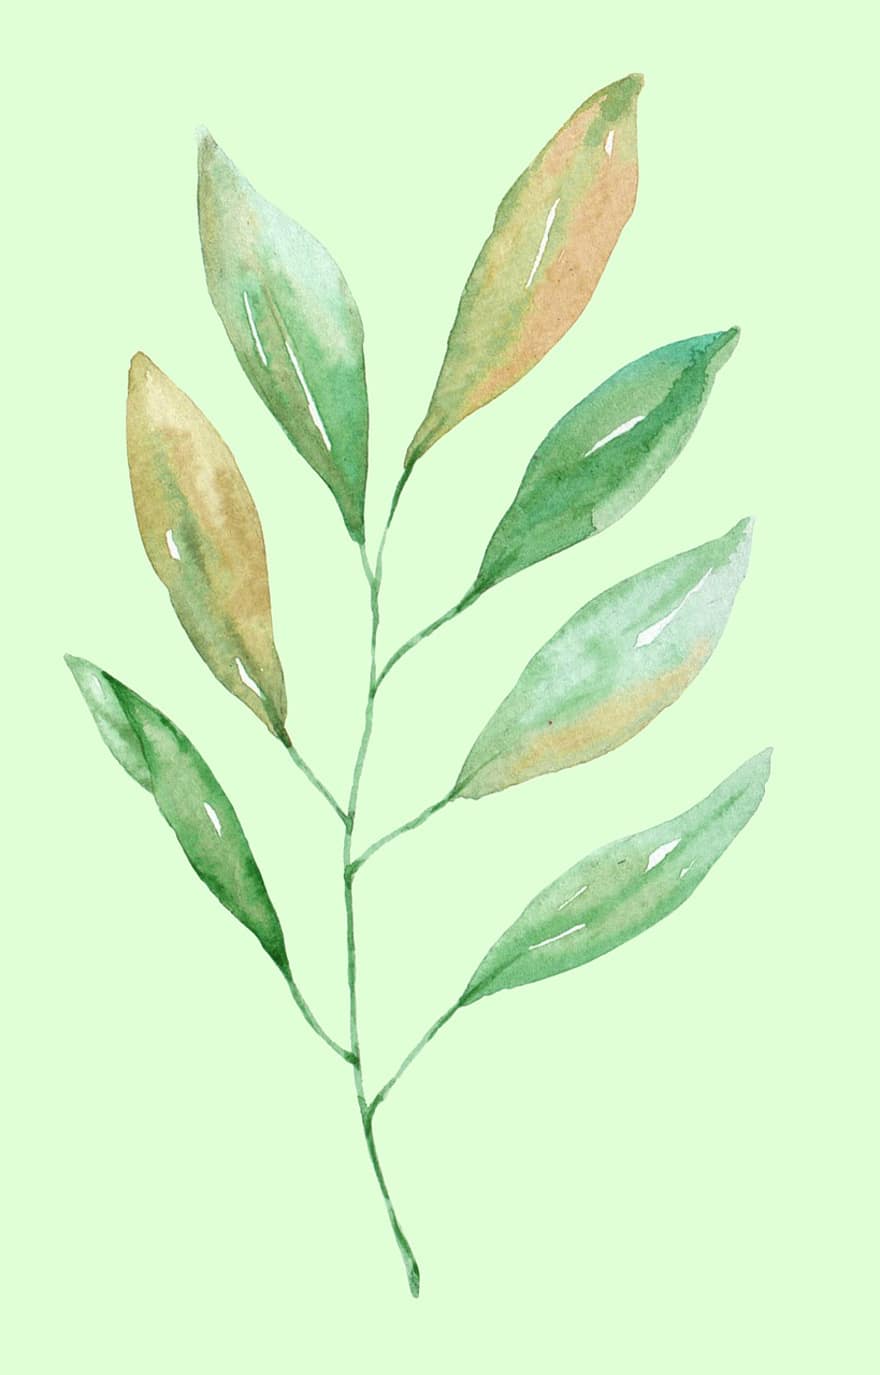 Leaves, Watercolor Painting, Boho Style, Bohemian Style, Background, leaf, backgrounds, green color, plant, illustration, pattern